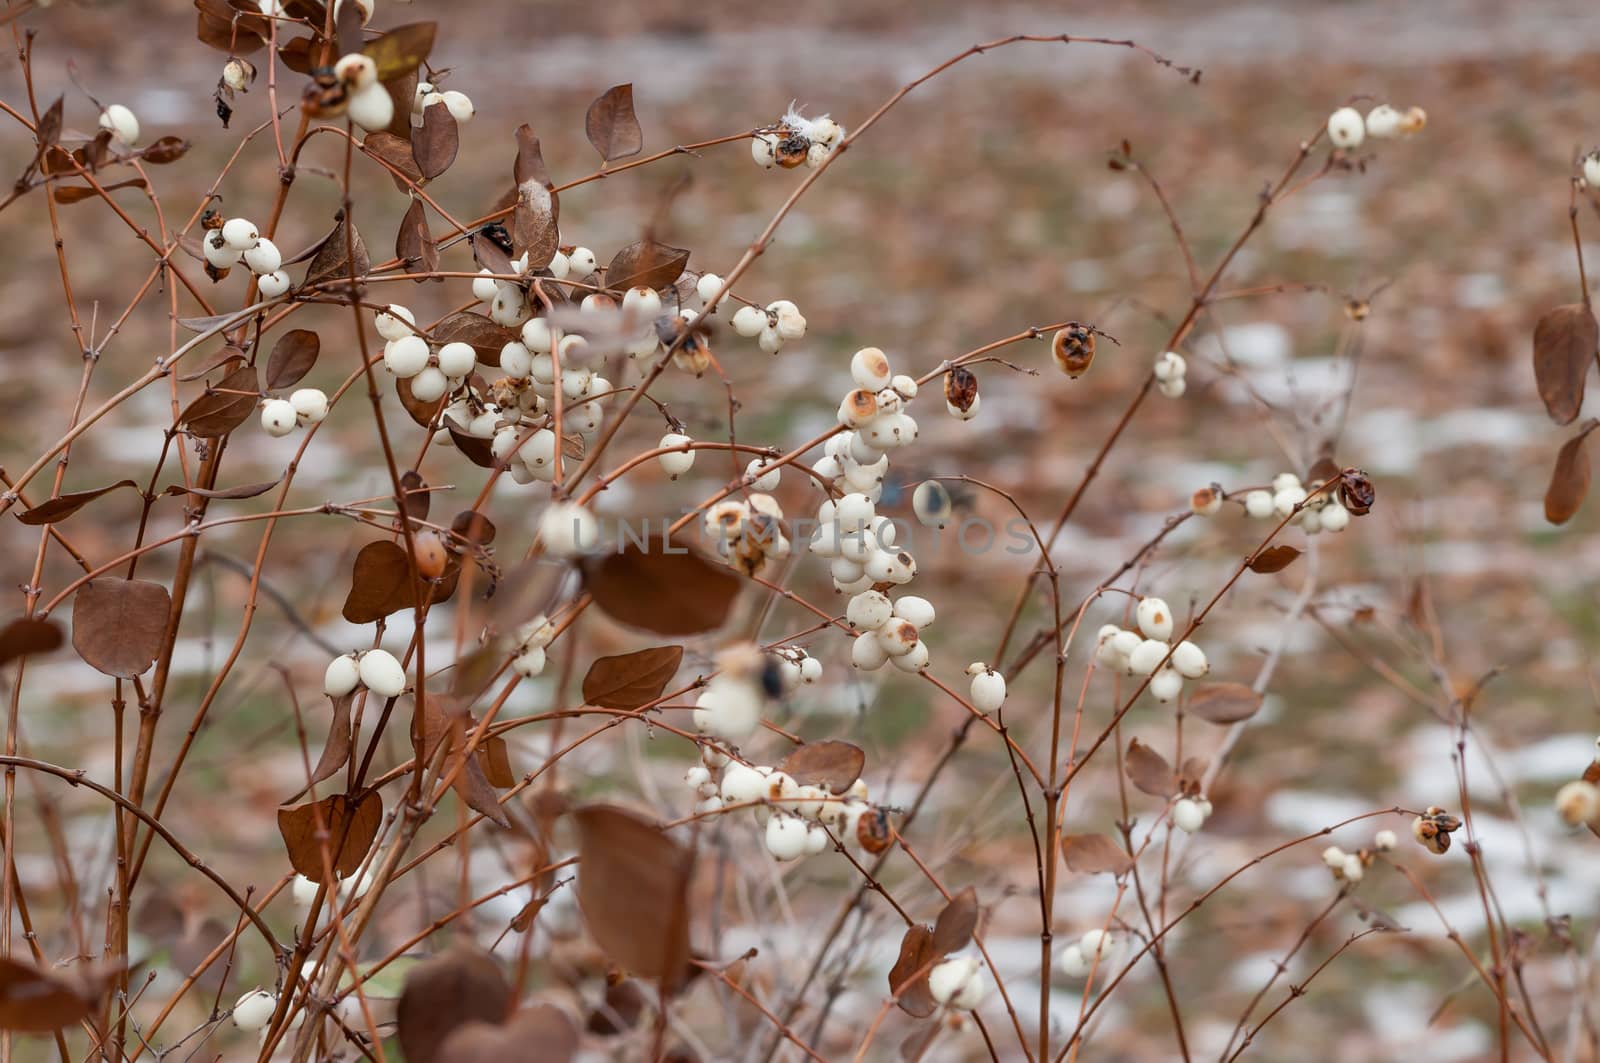 Snowberry bush with white fruits in winter